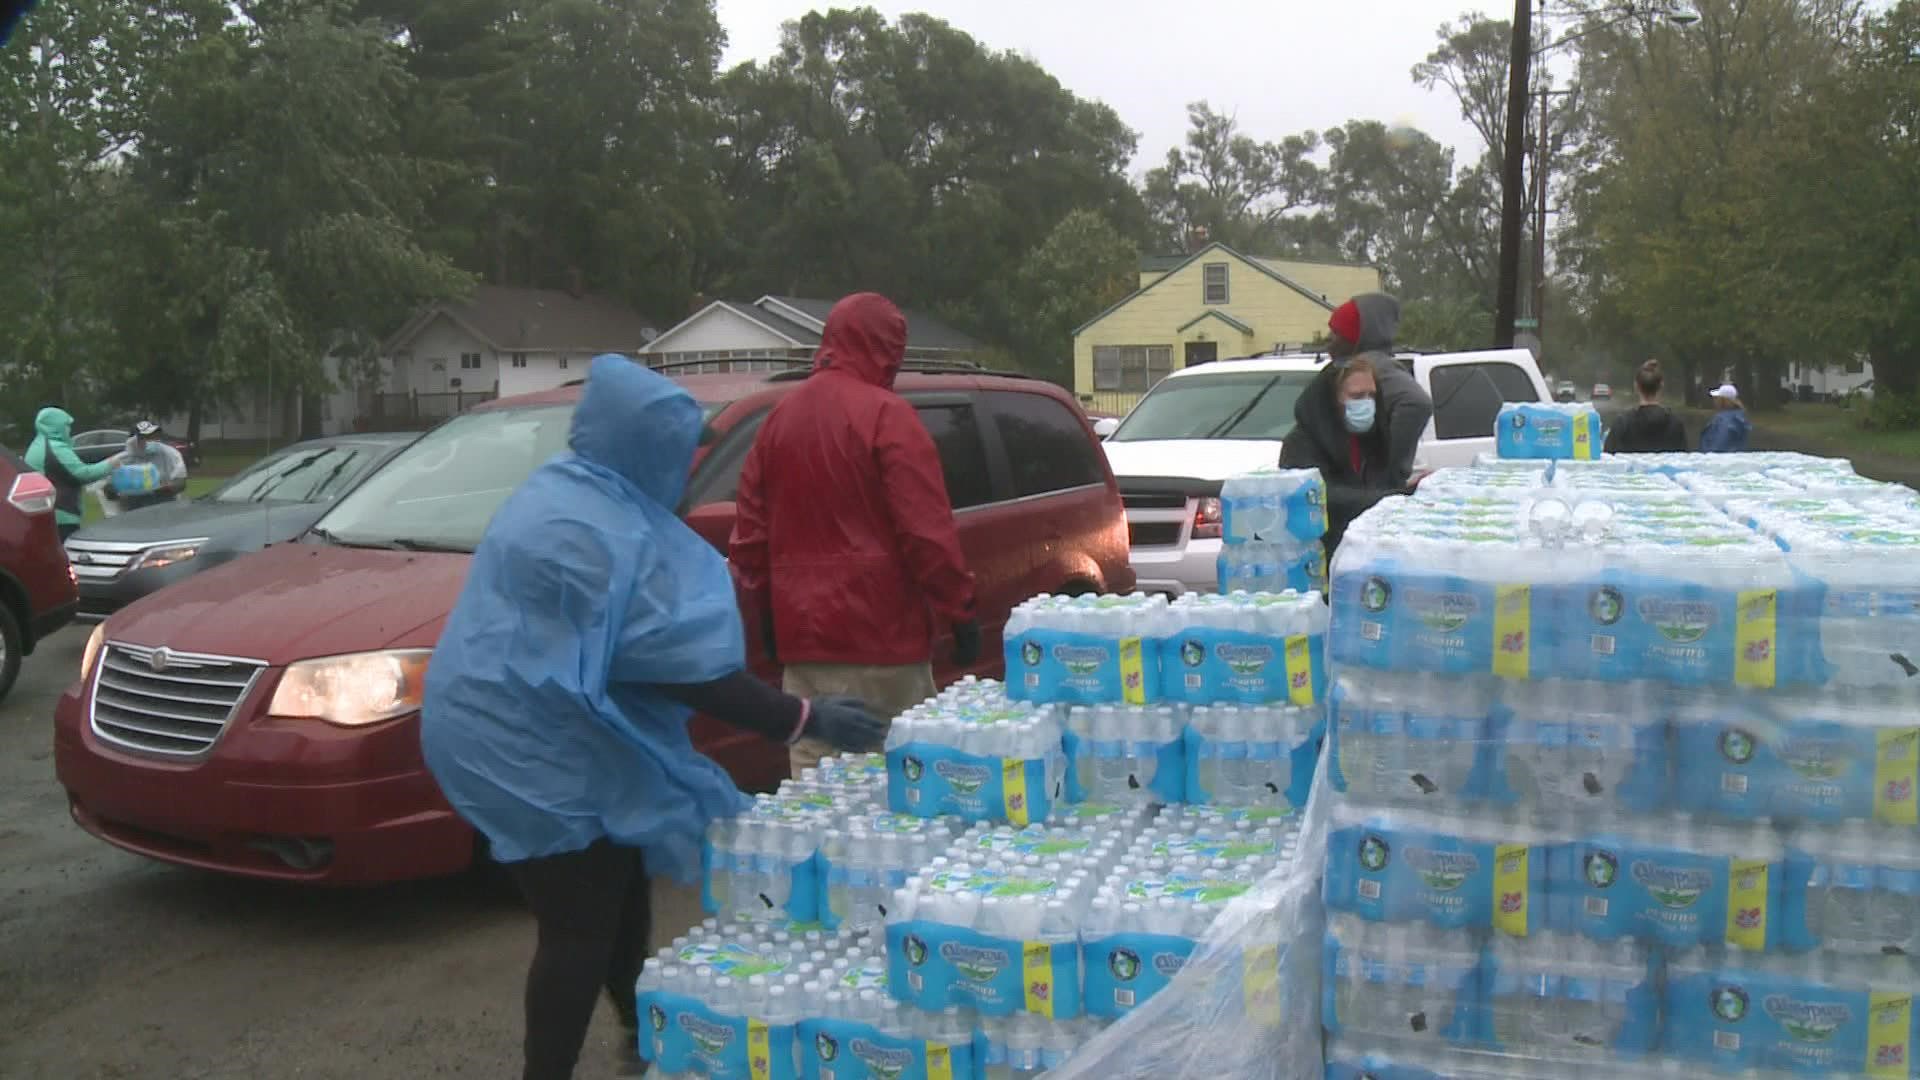 Residents of Benton Harbor are urged to use bottled water indefinitely until the crisis the city is facing is over. A local group is urging the community for help.